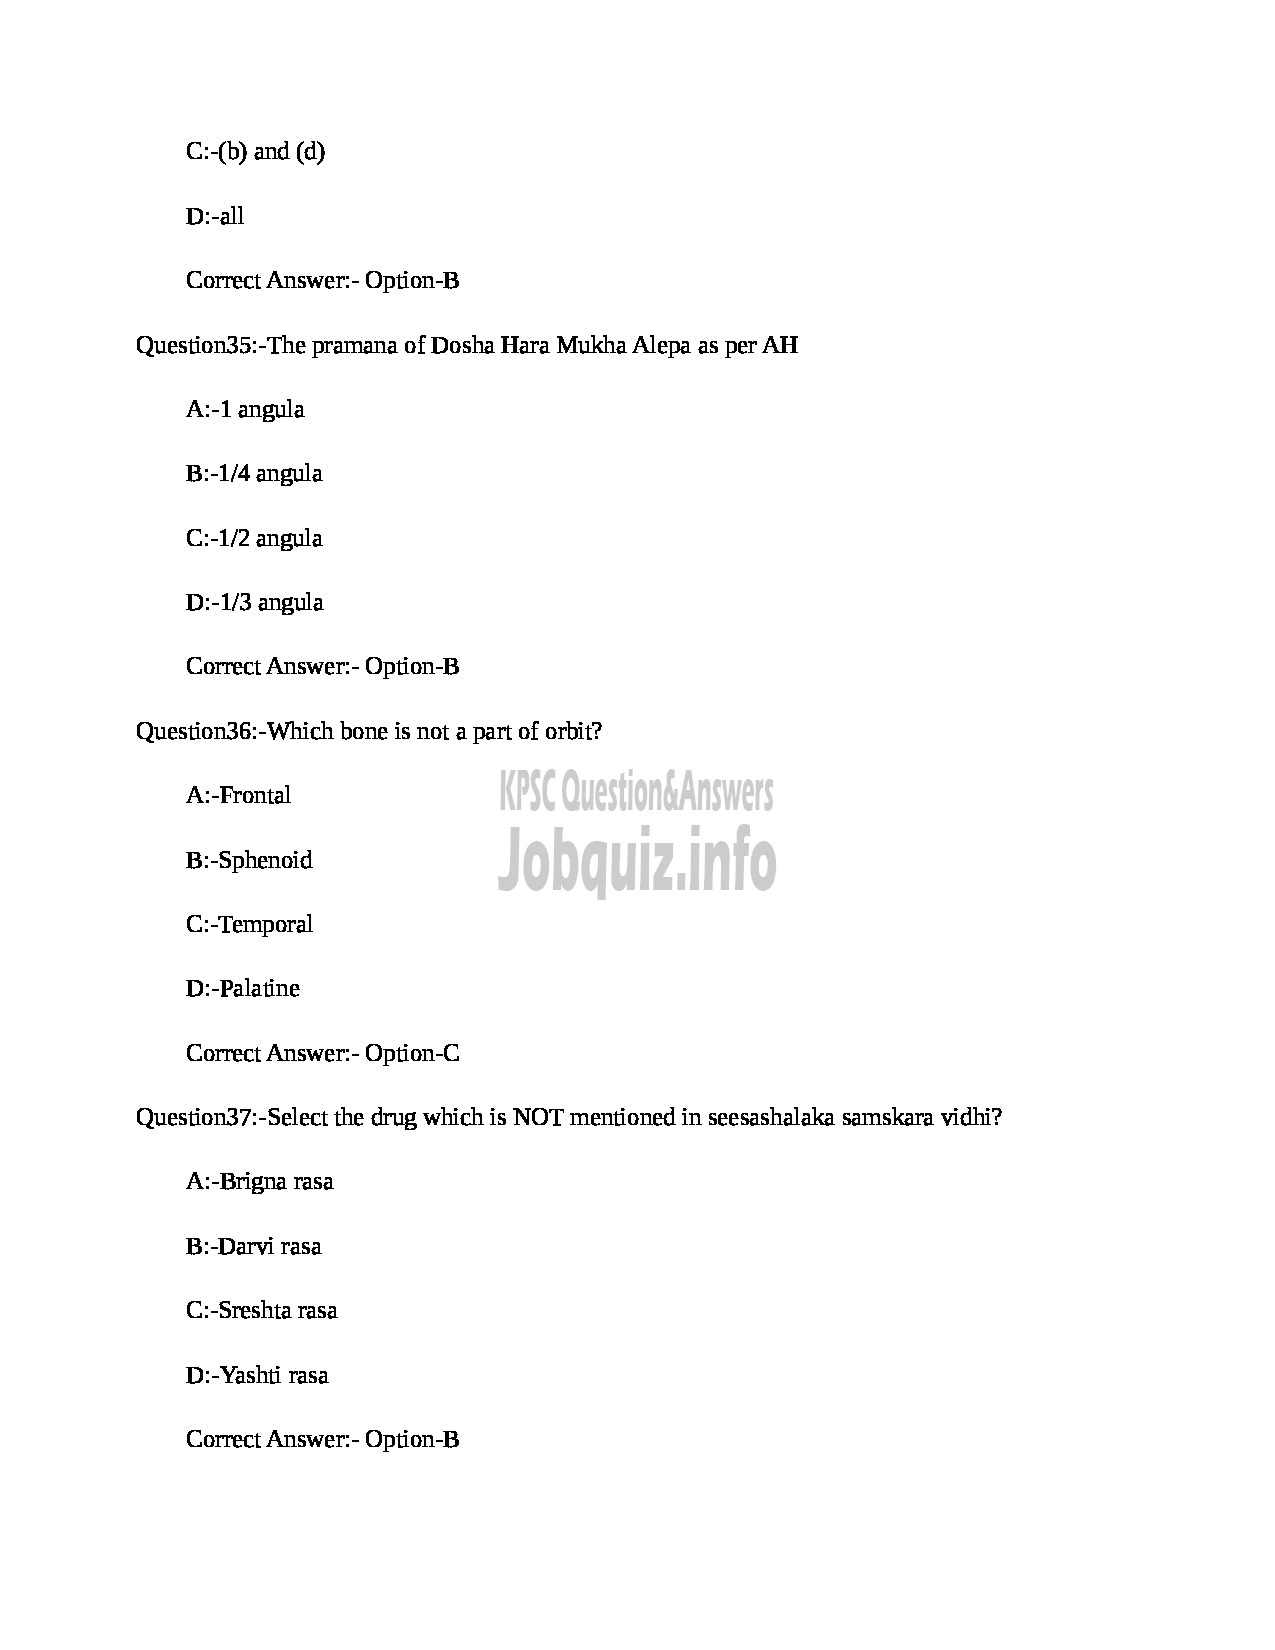 Kerala PSC Question Paper - MEDICAL OFFICER (NETRA) INDIAN SYSTEMS OF MEDICINE-11